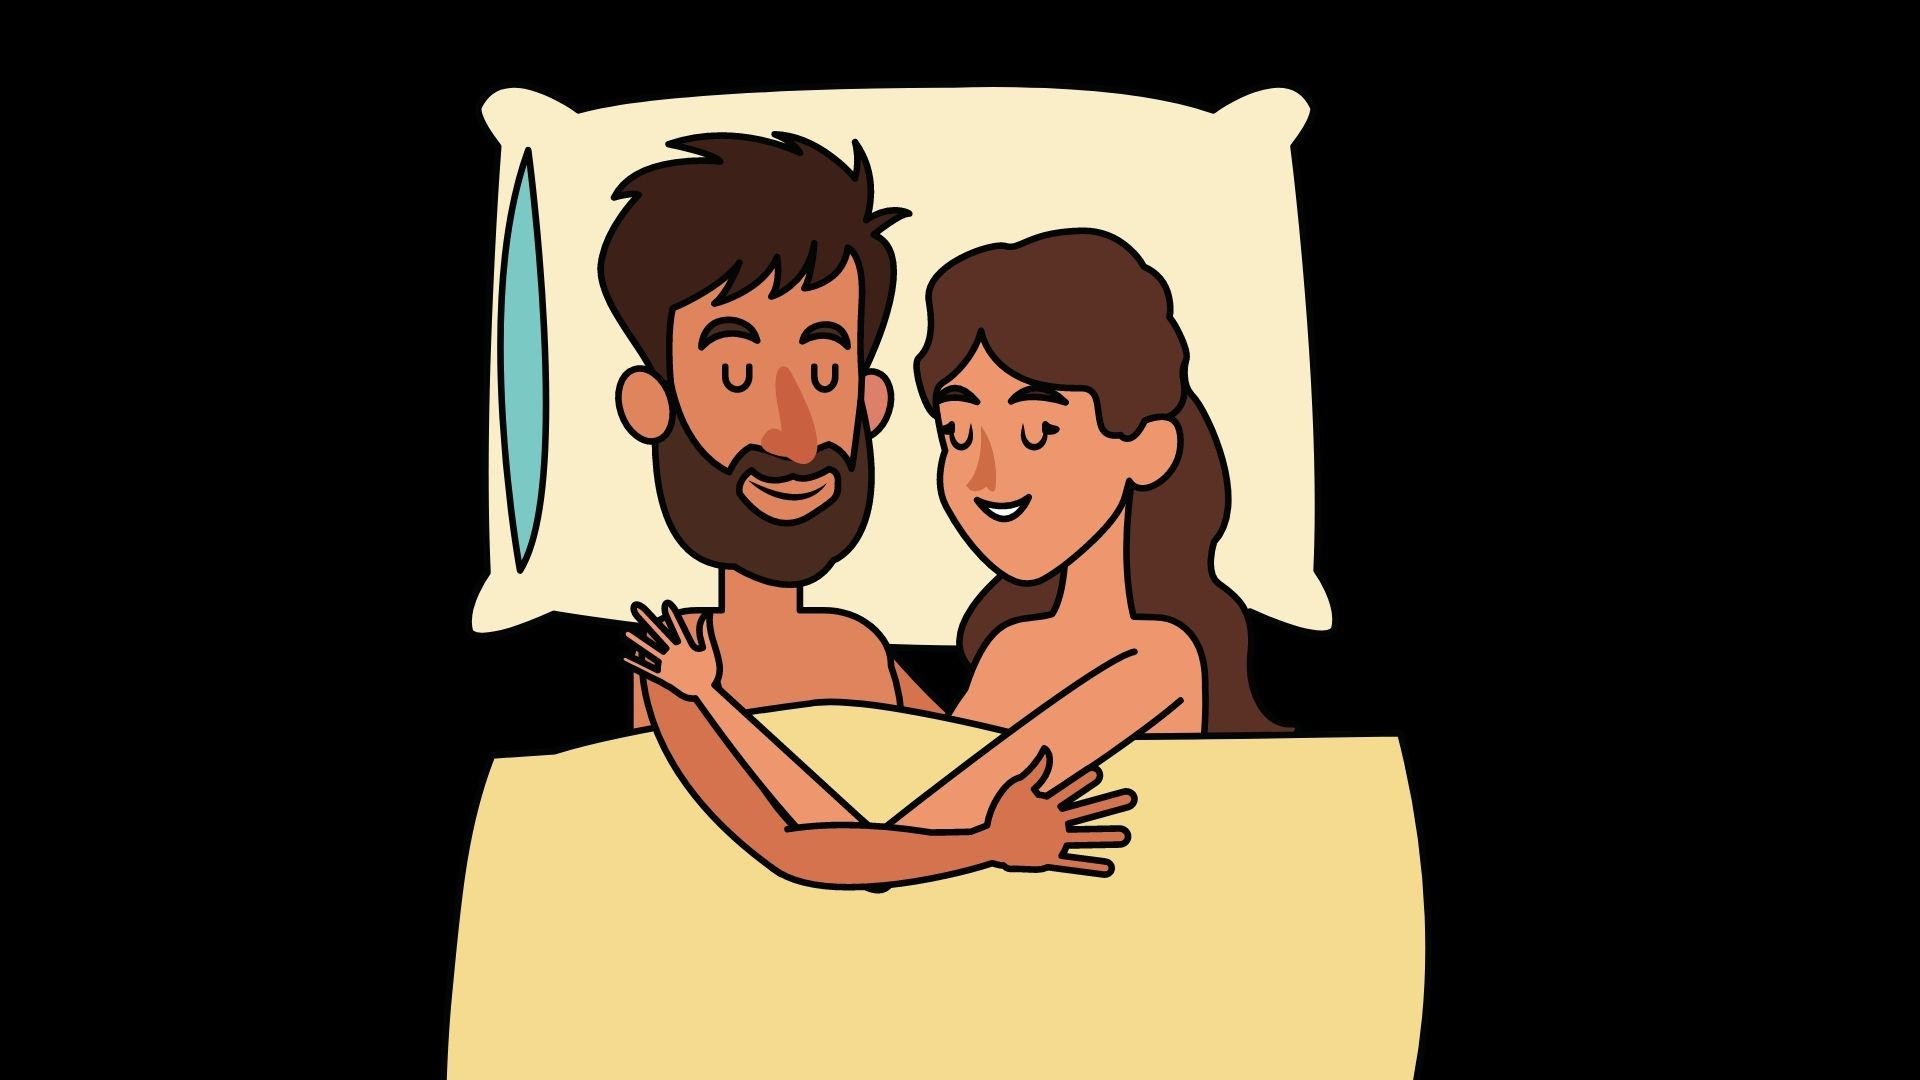 A graphic of a dark haired man and woman in bed together sleeping